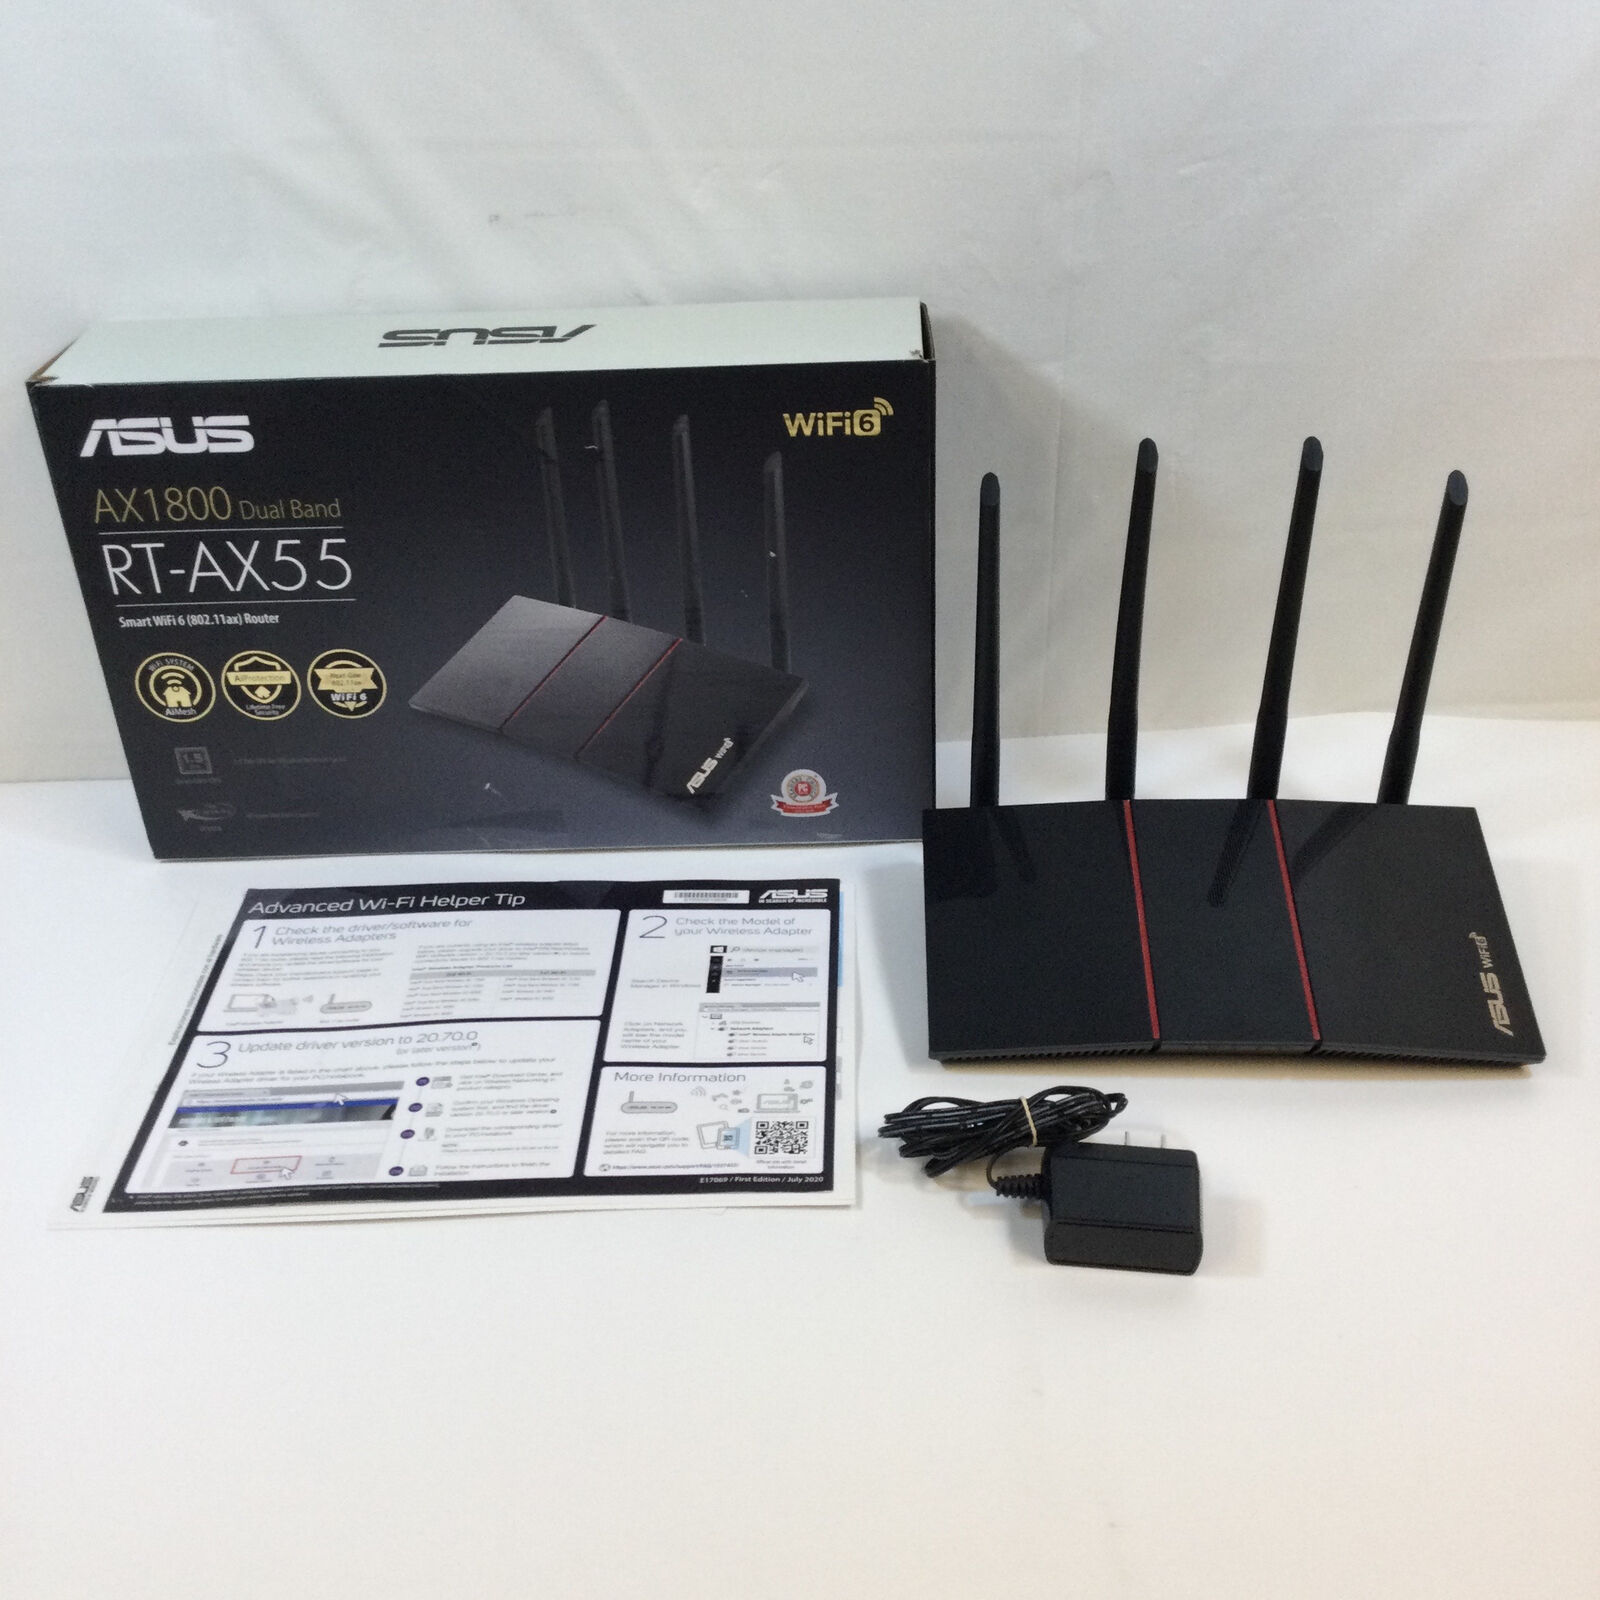 ASUS RT-AX55 Black High Speed AX1800 Dual Band Smart WiFi 6 Gigabit Router Used